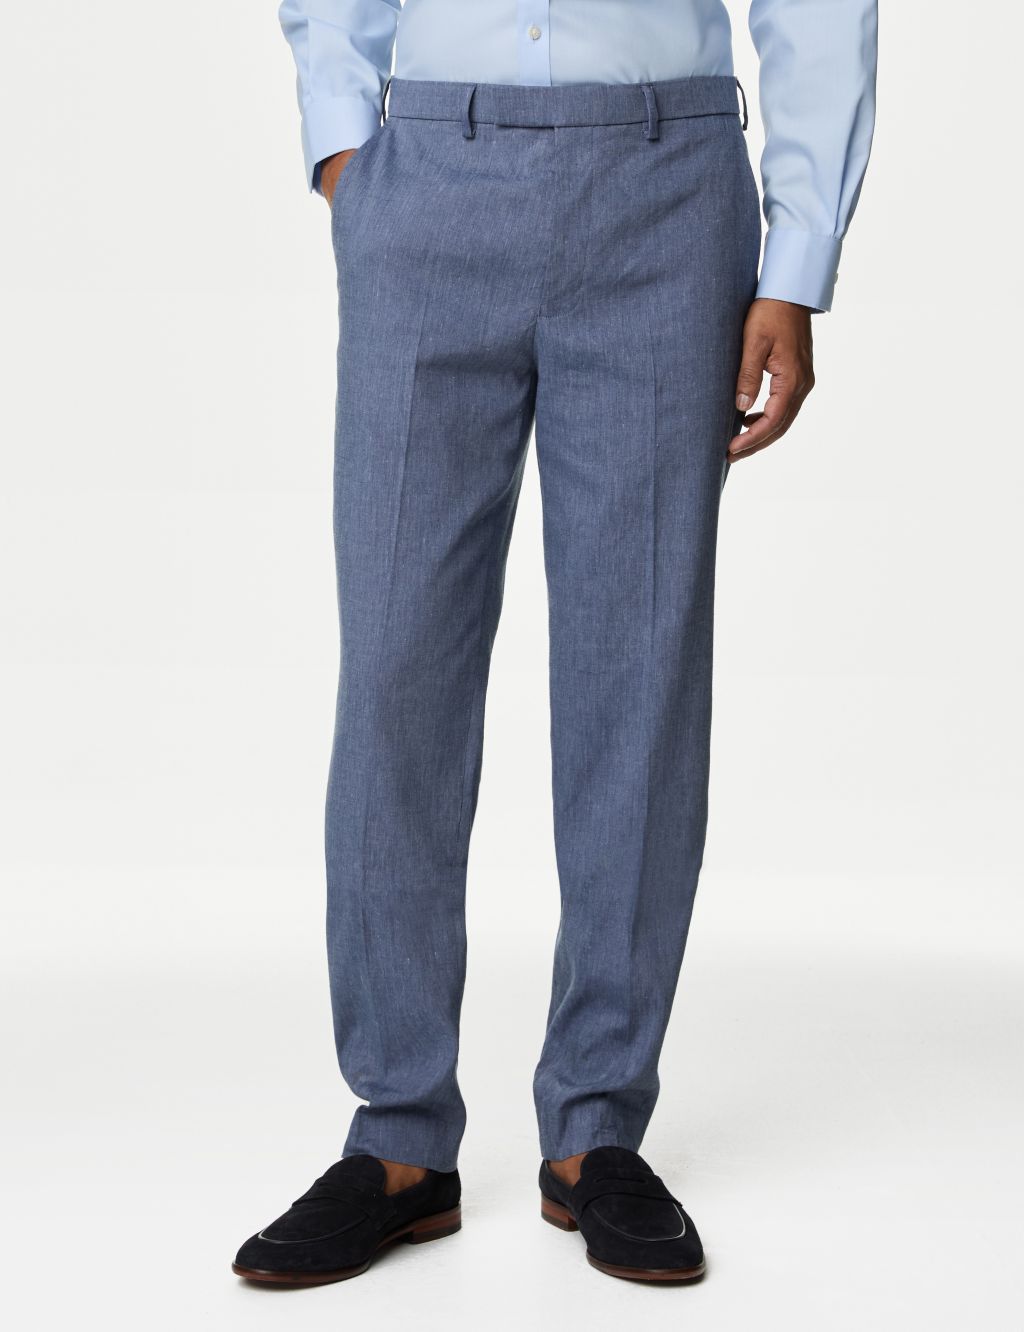 Tailored Fit Italian Linen Miracle™ Suit image 4